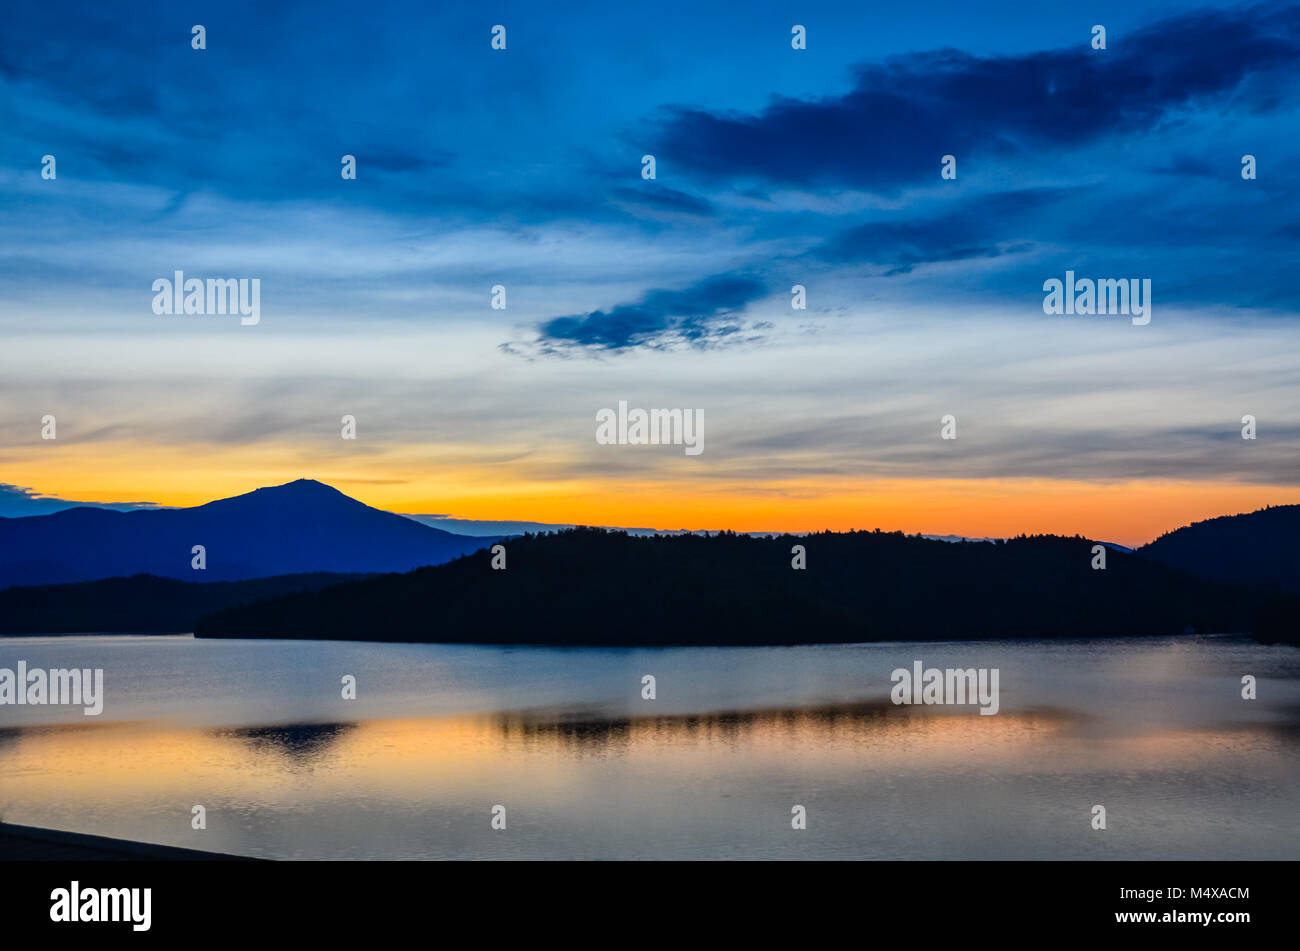 Glow of sun setting behind the Adirondack Mountains reflected on Lake Placid in Upstate New York. Stock Photo